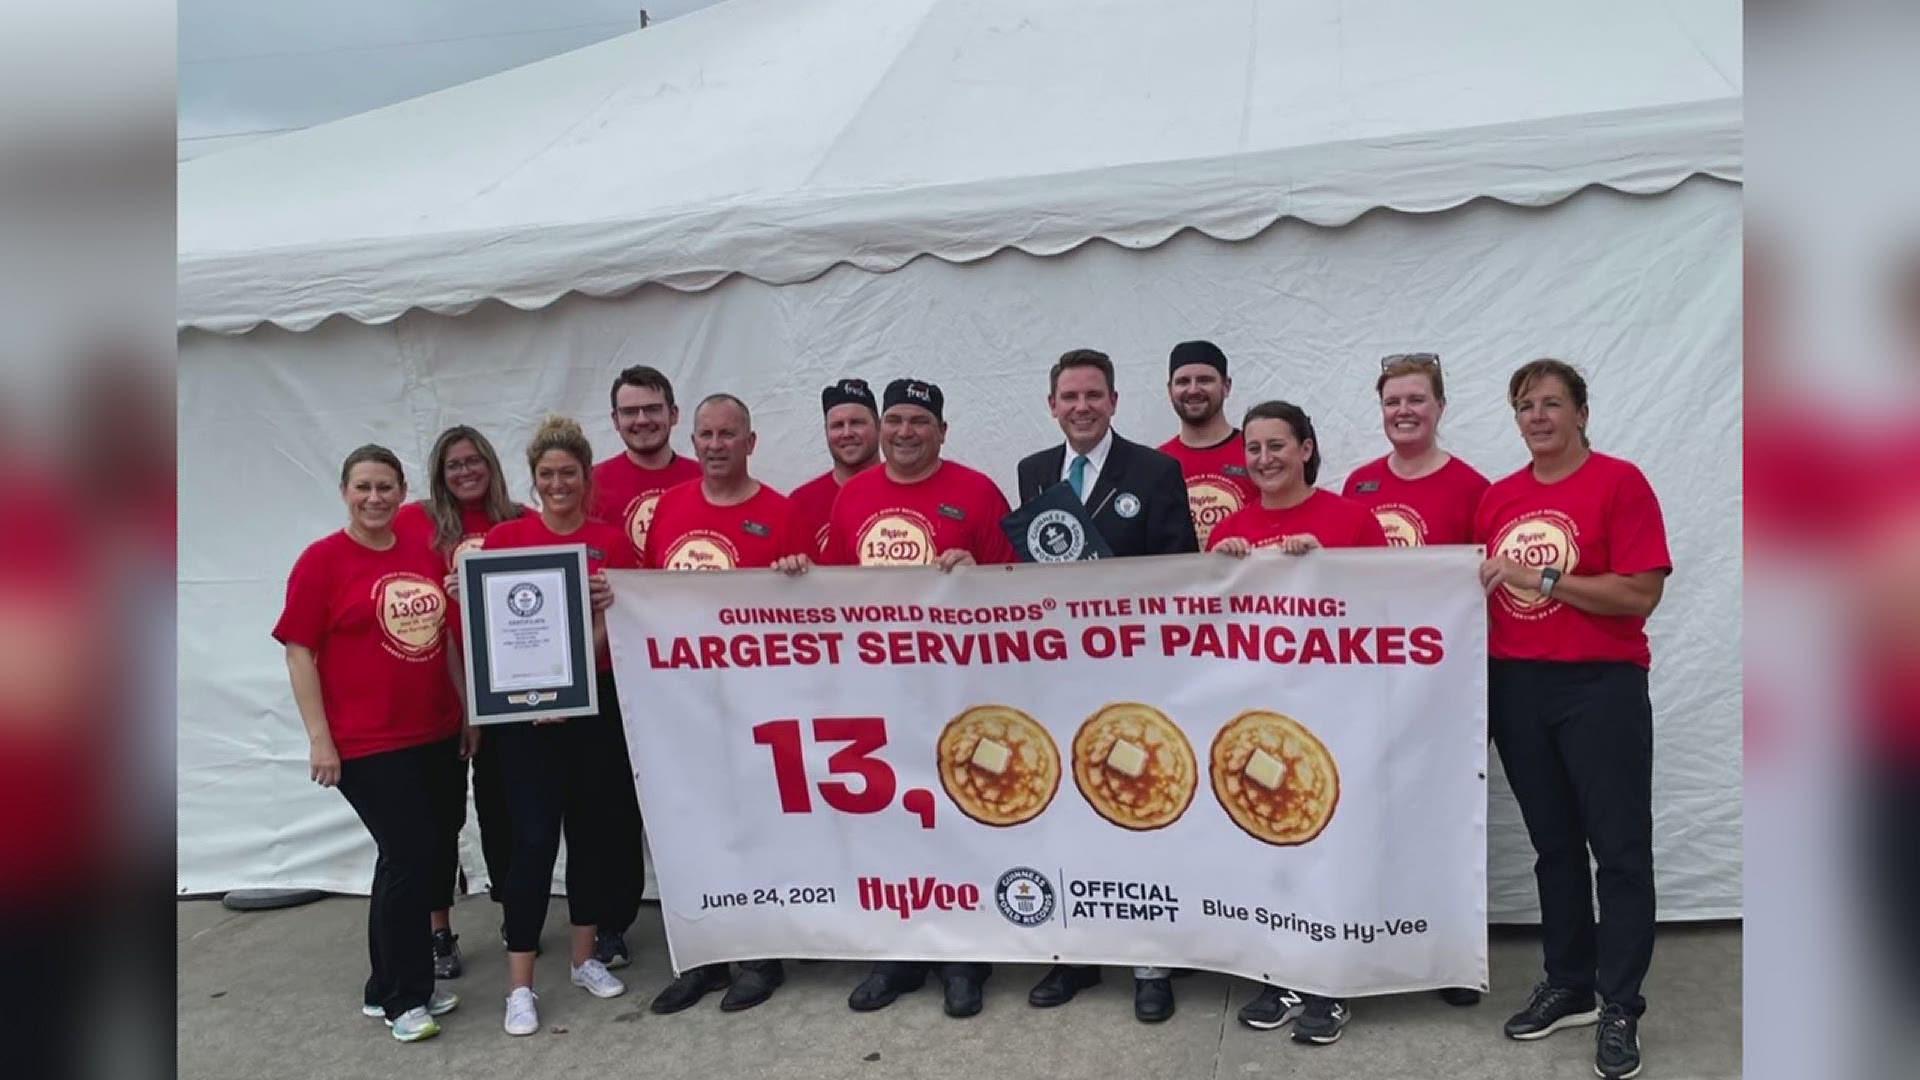 The Hy-Vee in Blue Springs, Missouri whipped up 13,000 pancakes to become the new Guinness World Record holder.